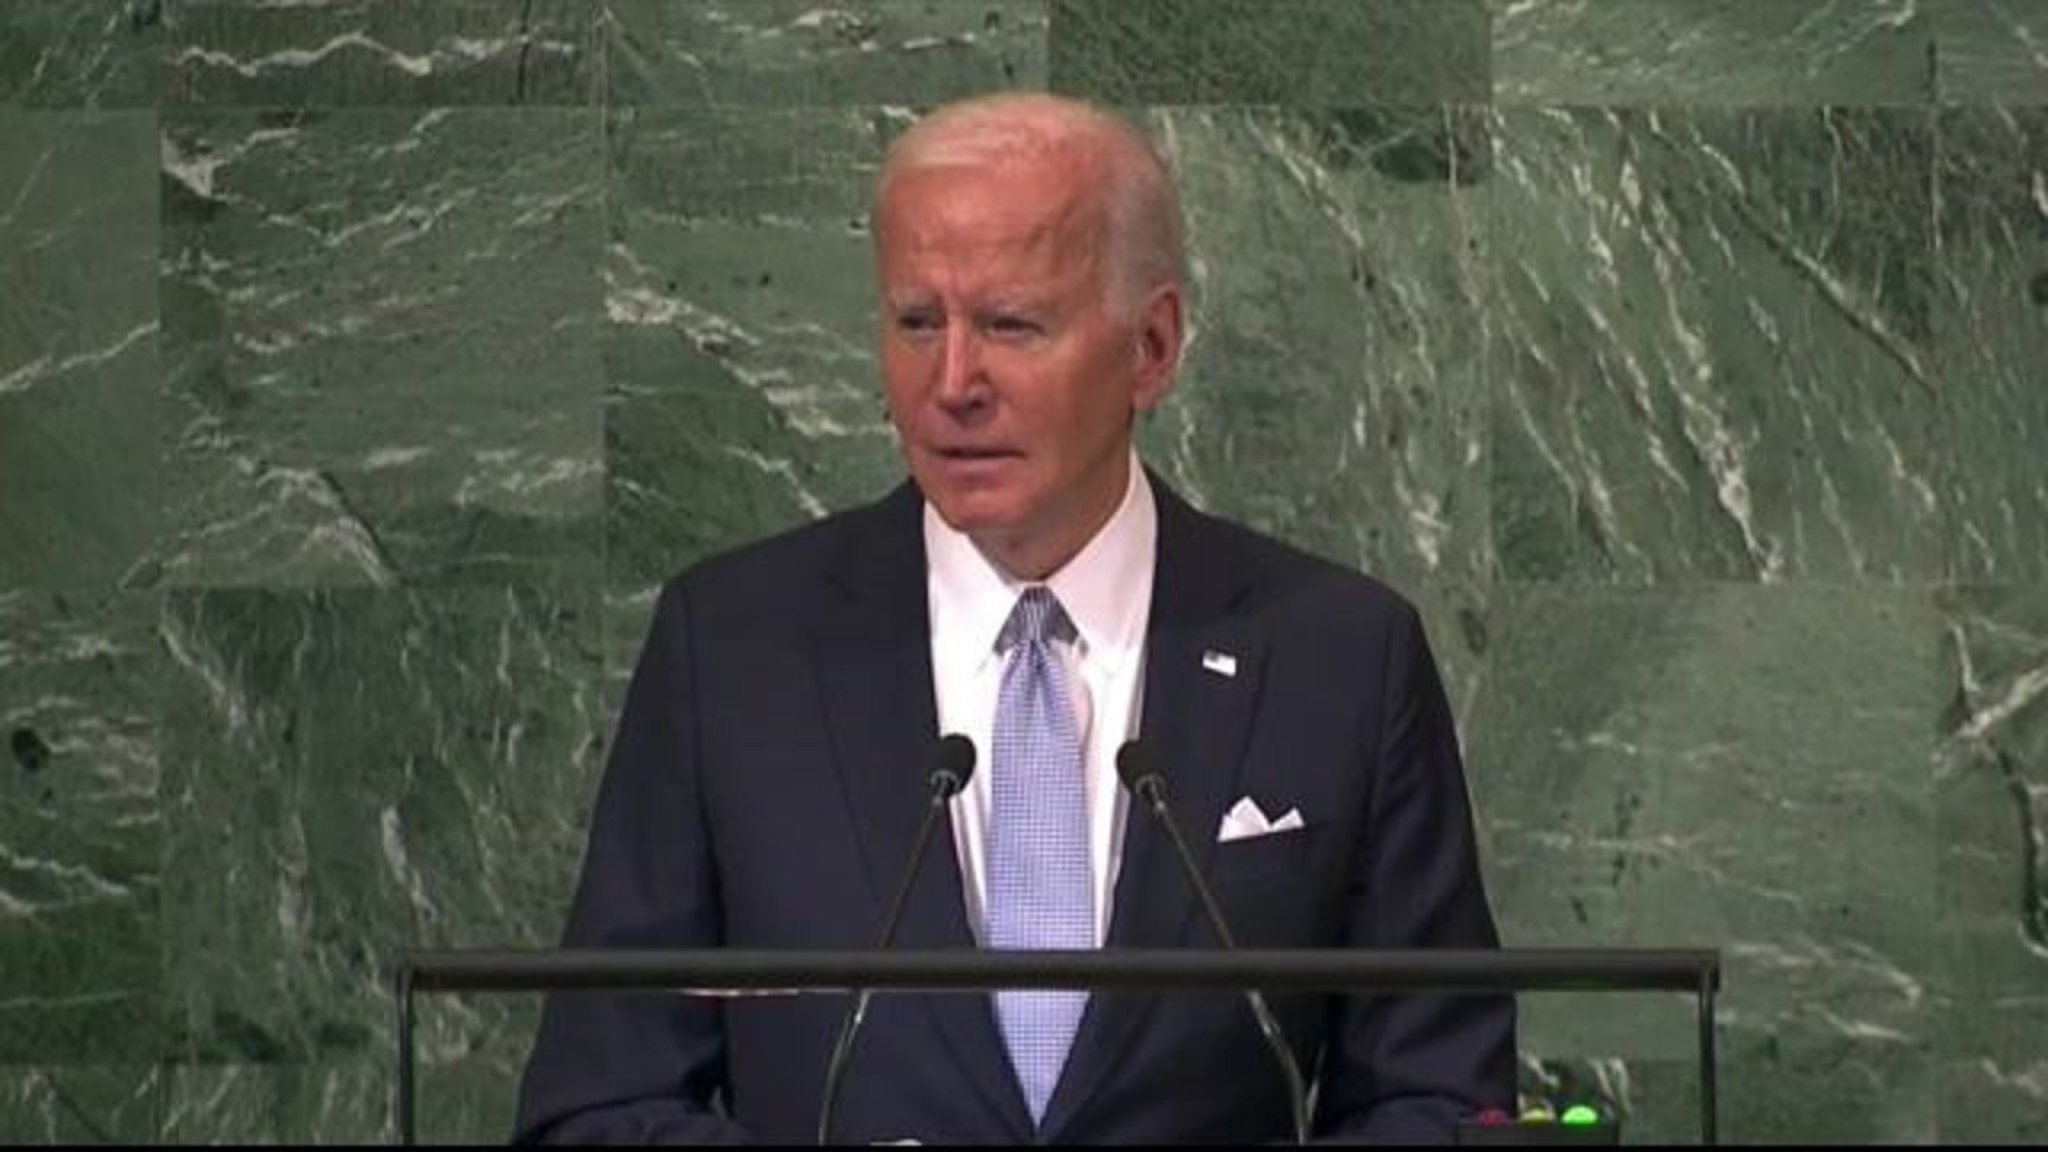 Biden at the UN General Assembly calls out Russian leader Vladimir Putin, who threatened the West on Wednesday.